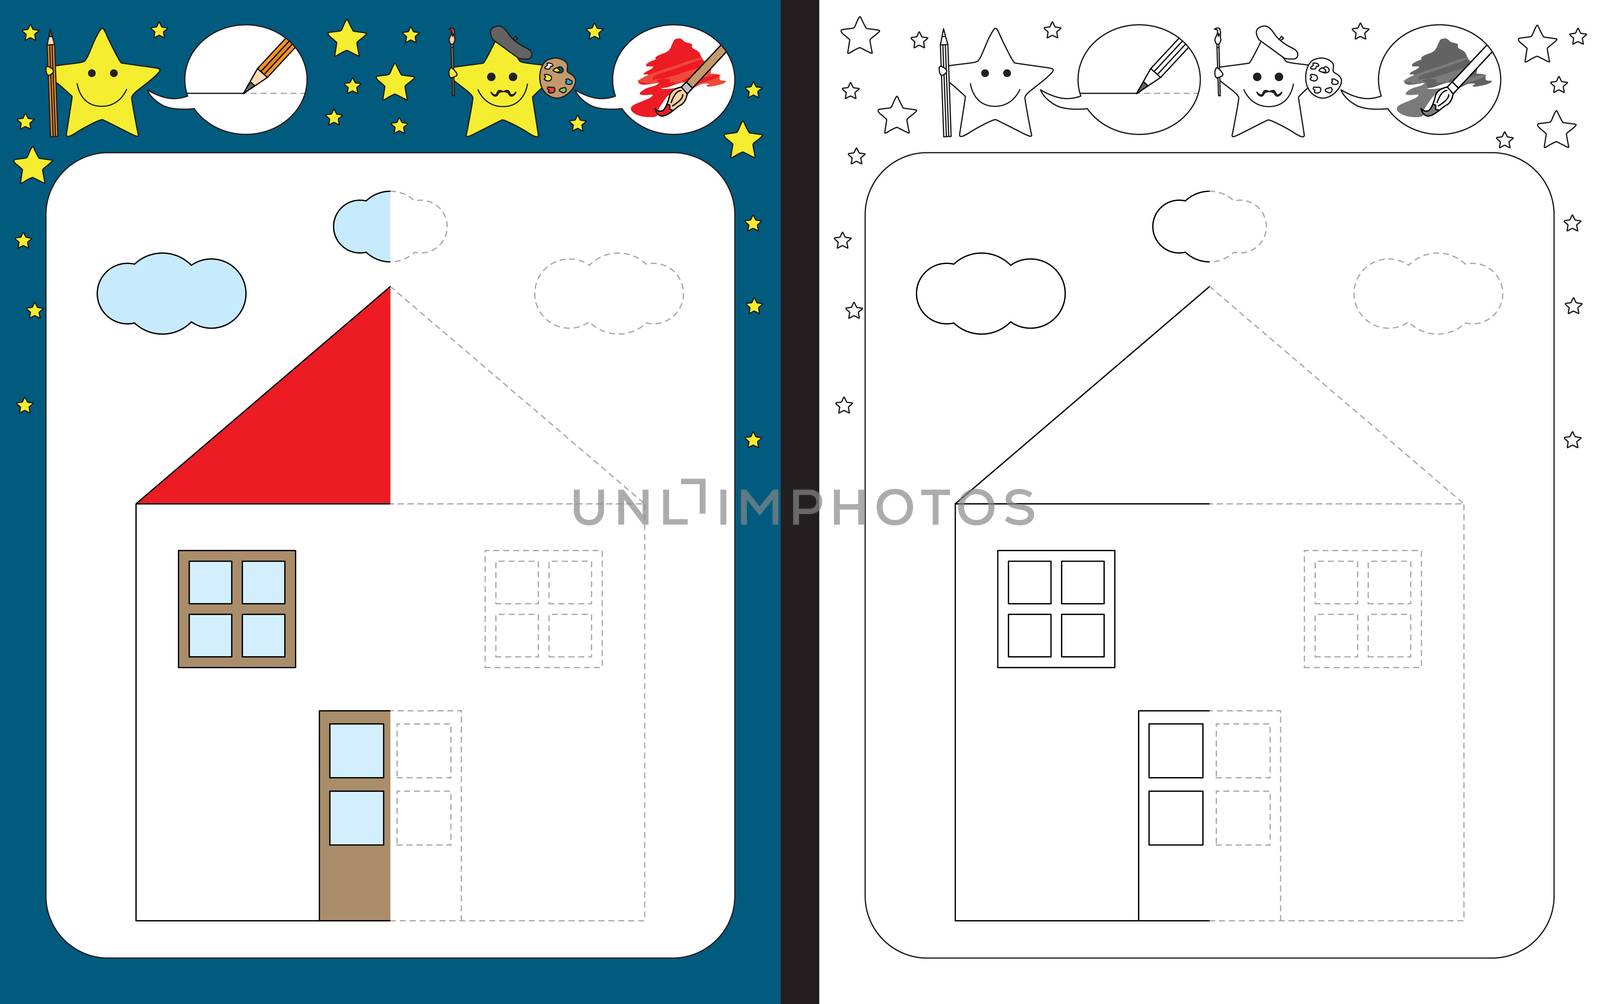 Preschool worksheet for practicing fine motor skills - tracing dashed lines - finish the illustration of the house